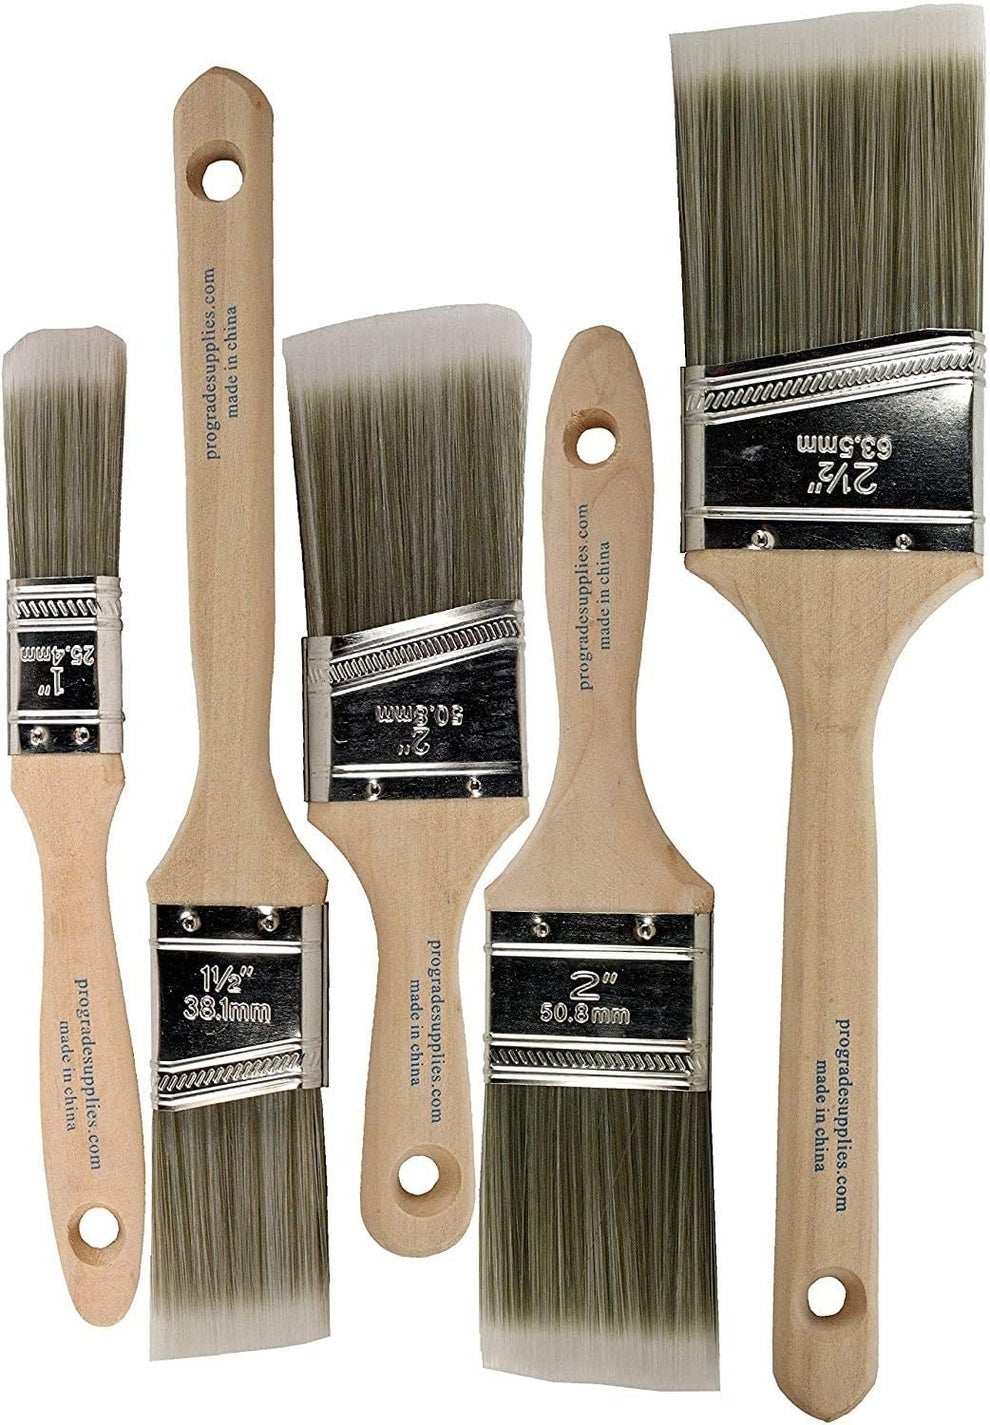 12 Pack Professional Paint Brushes, Flat Paint Brushes With Wooden Handle,  Perfect Wall Paint Brush For Furniture, Walls - 63.5mm